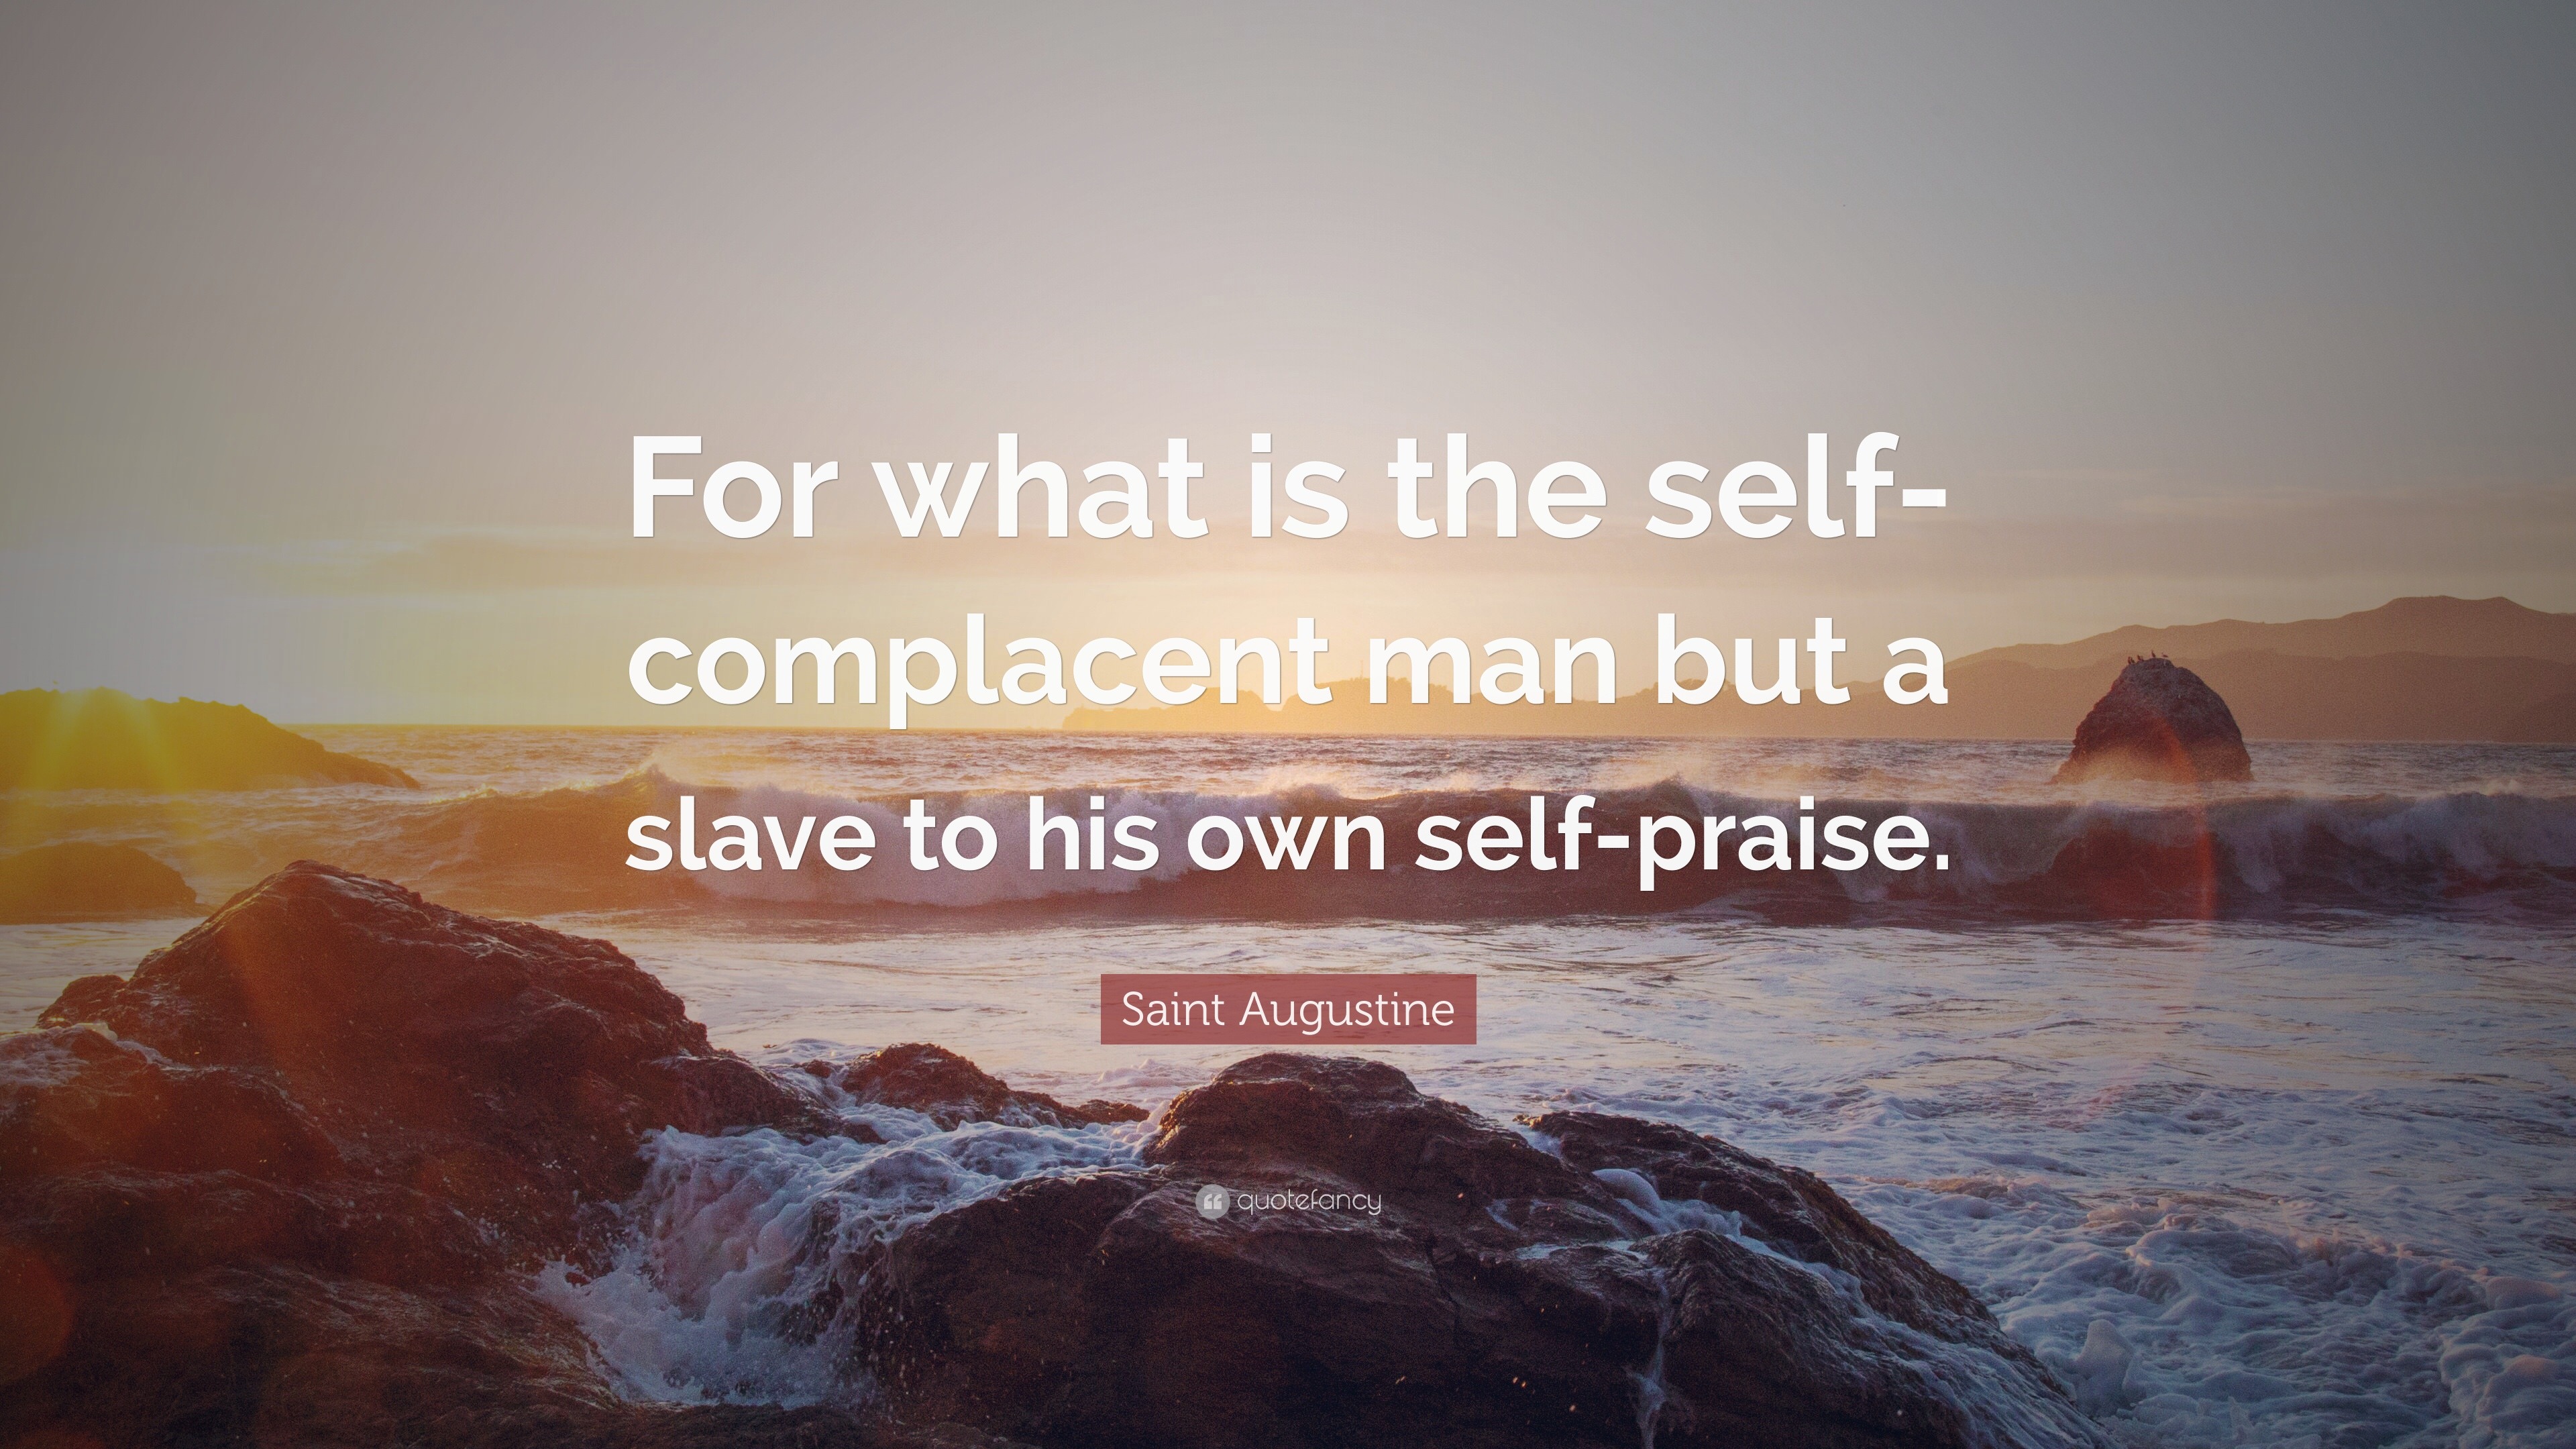 Saint Augustine Quote: “For what is the self-complacent man but a slave ...